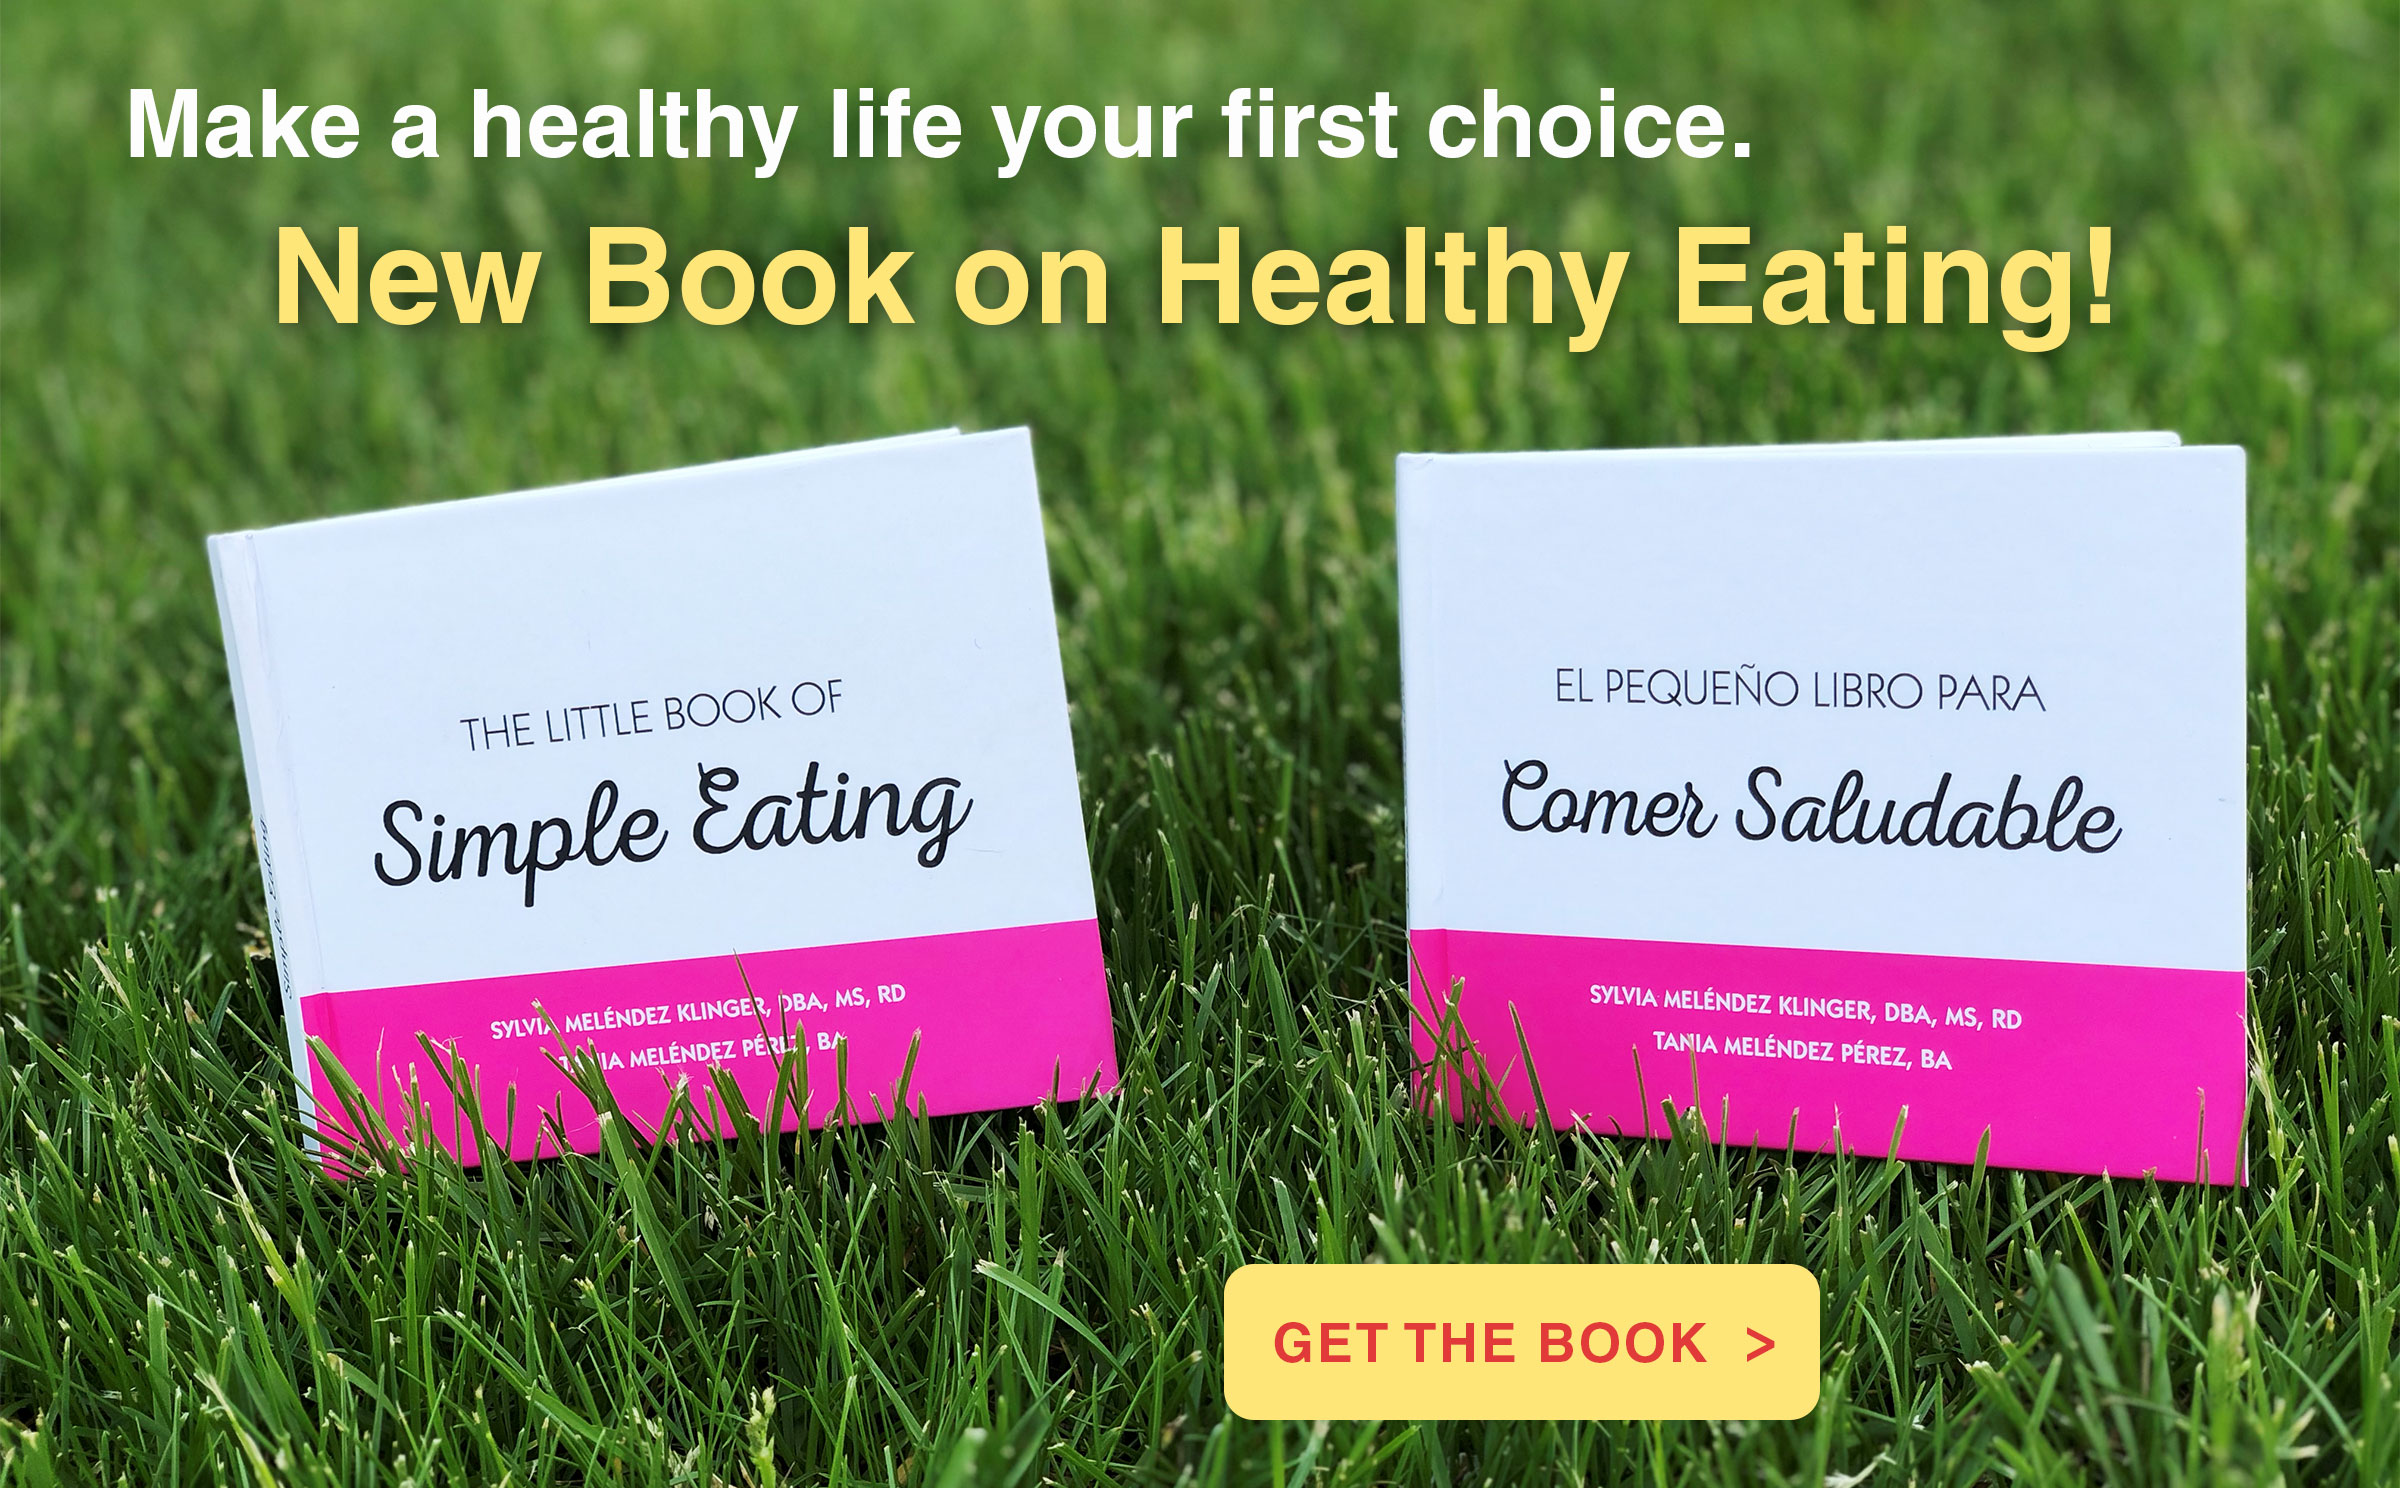 The Little Book of Simple Eating